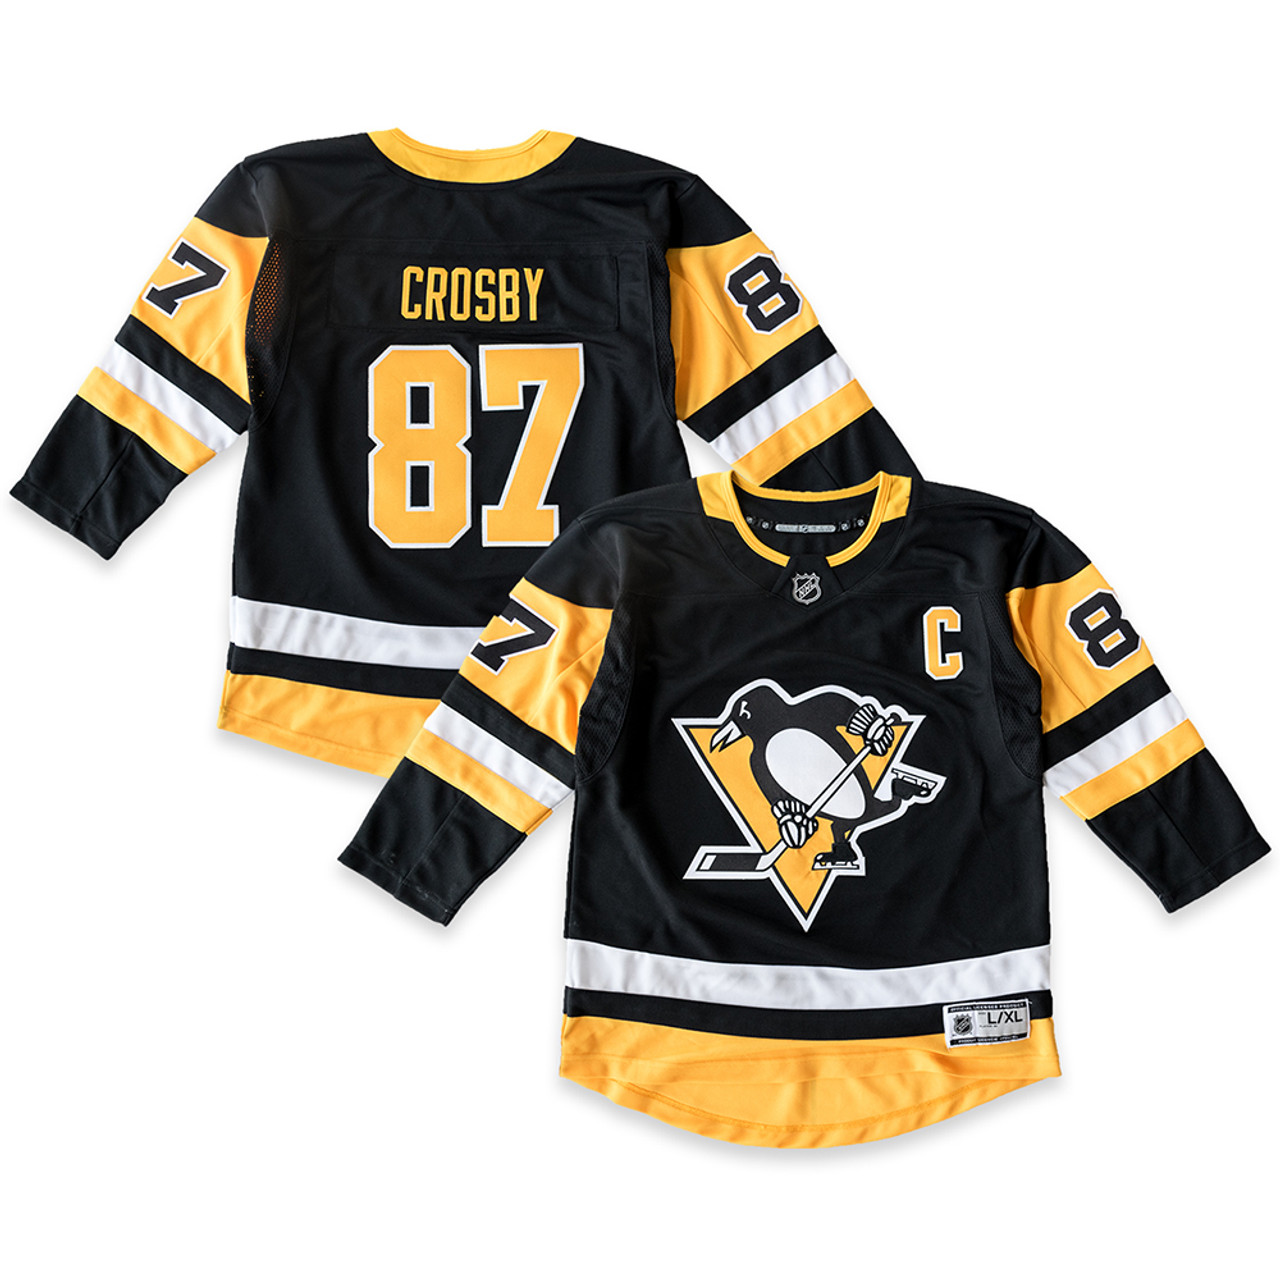 PITTSBURGH PENGUINS INFANT PREMIERE JERSEY CROSBY 87